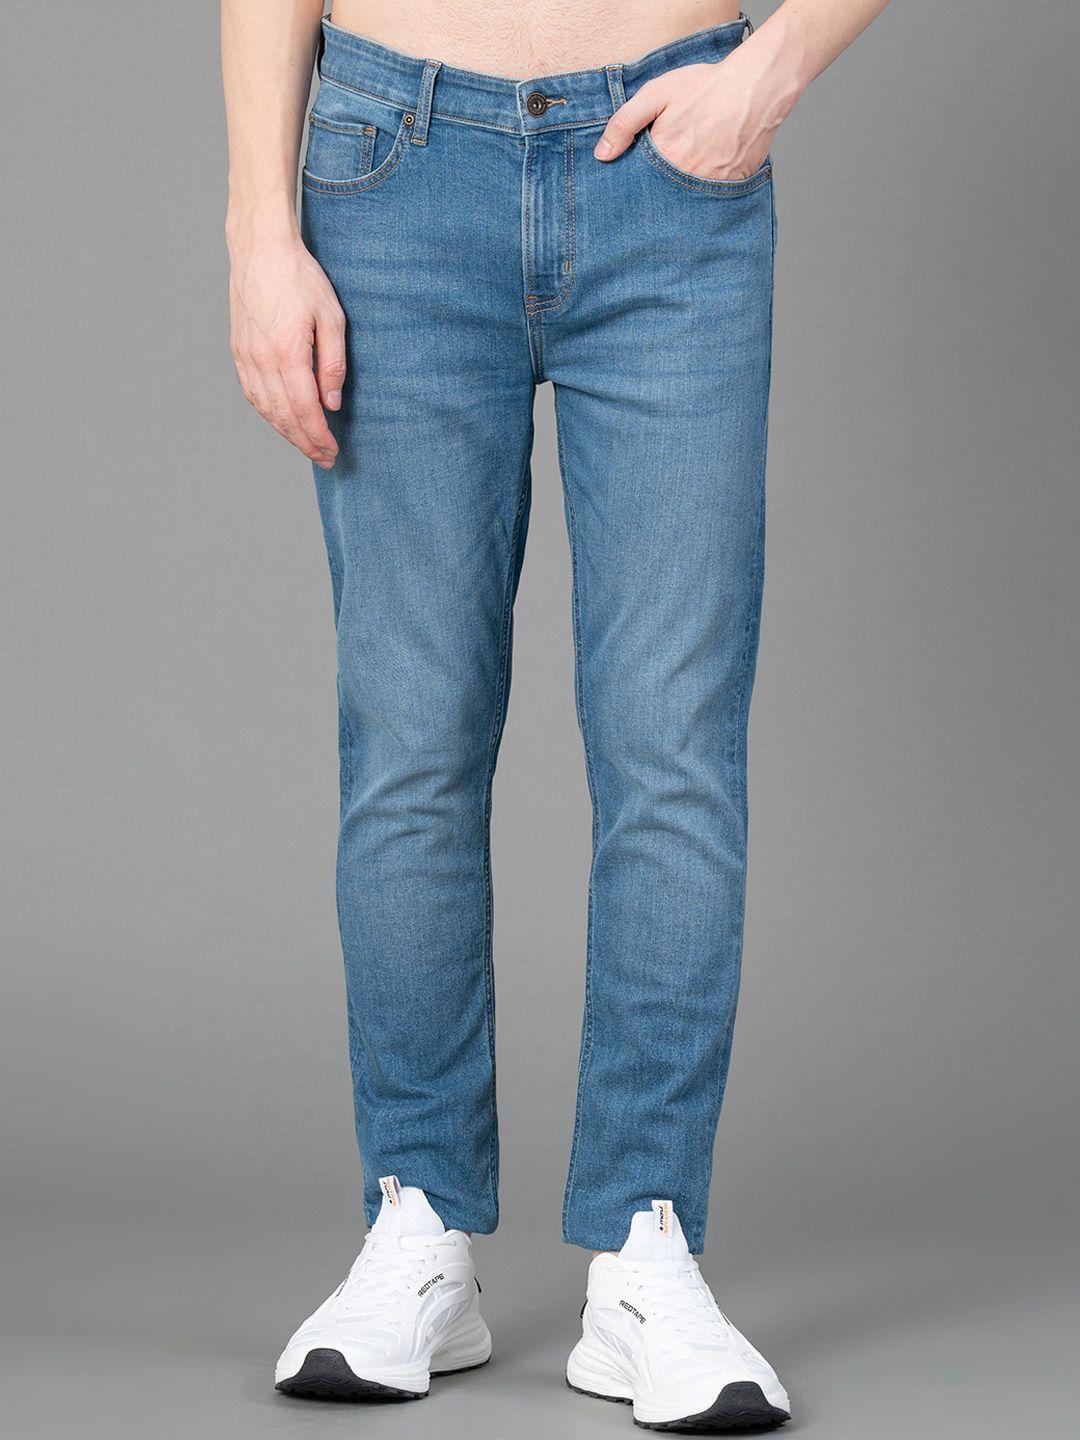 red tape men light fade stretchable jeans